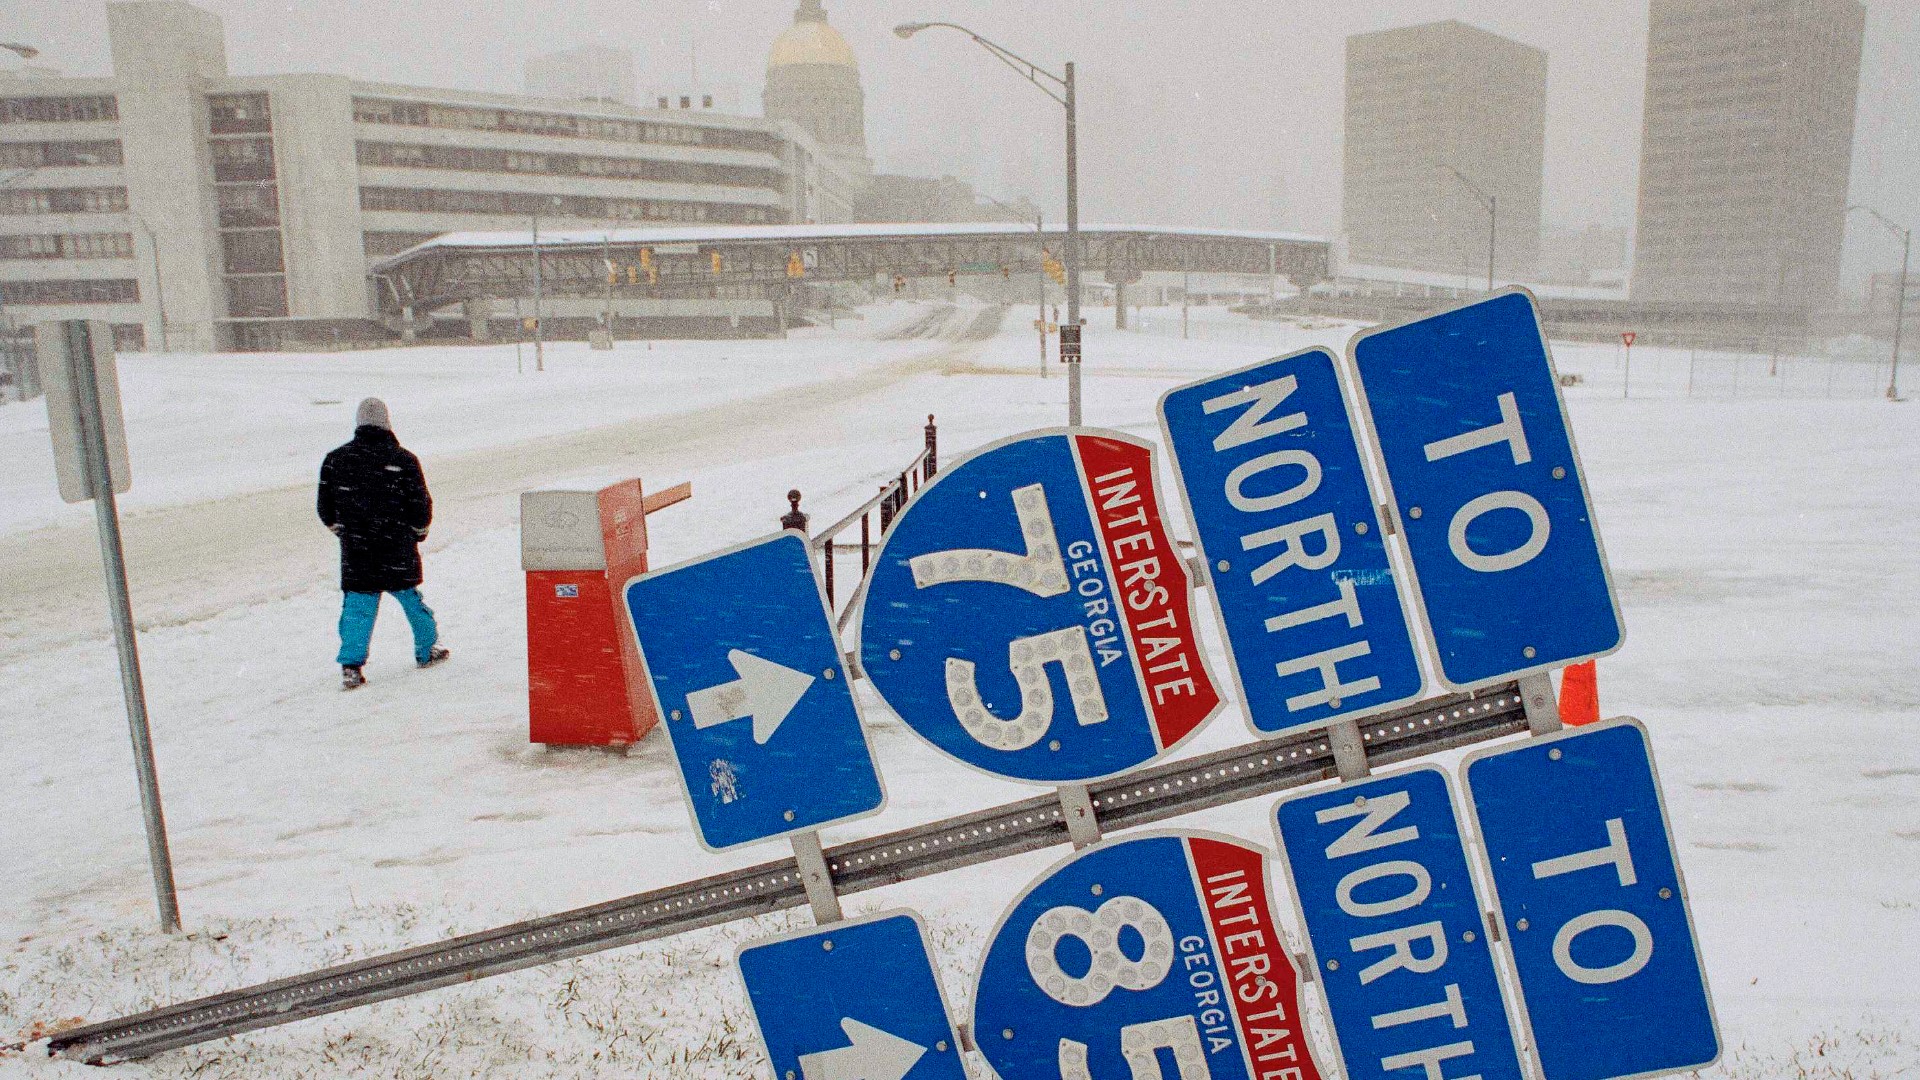 The 1993 "Storm of the Century" brought snow throughout the South.